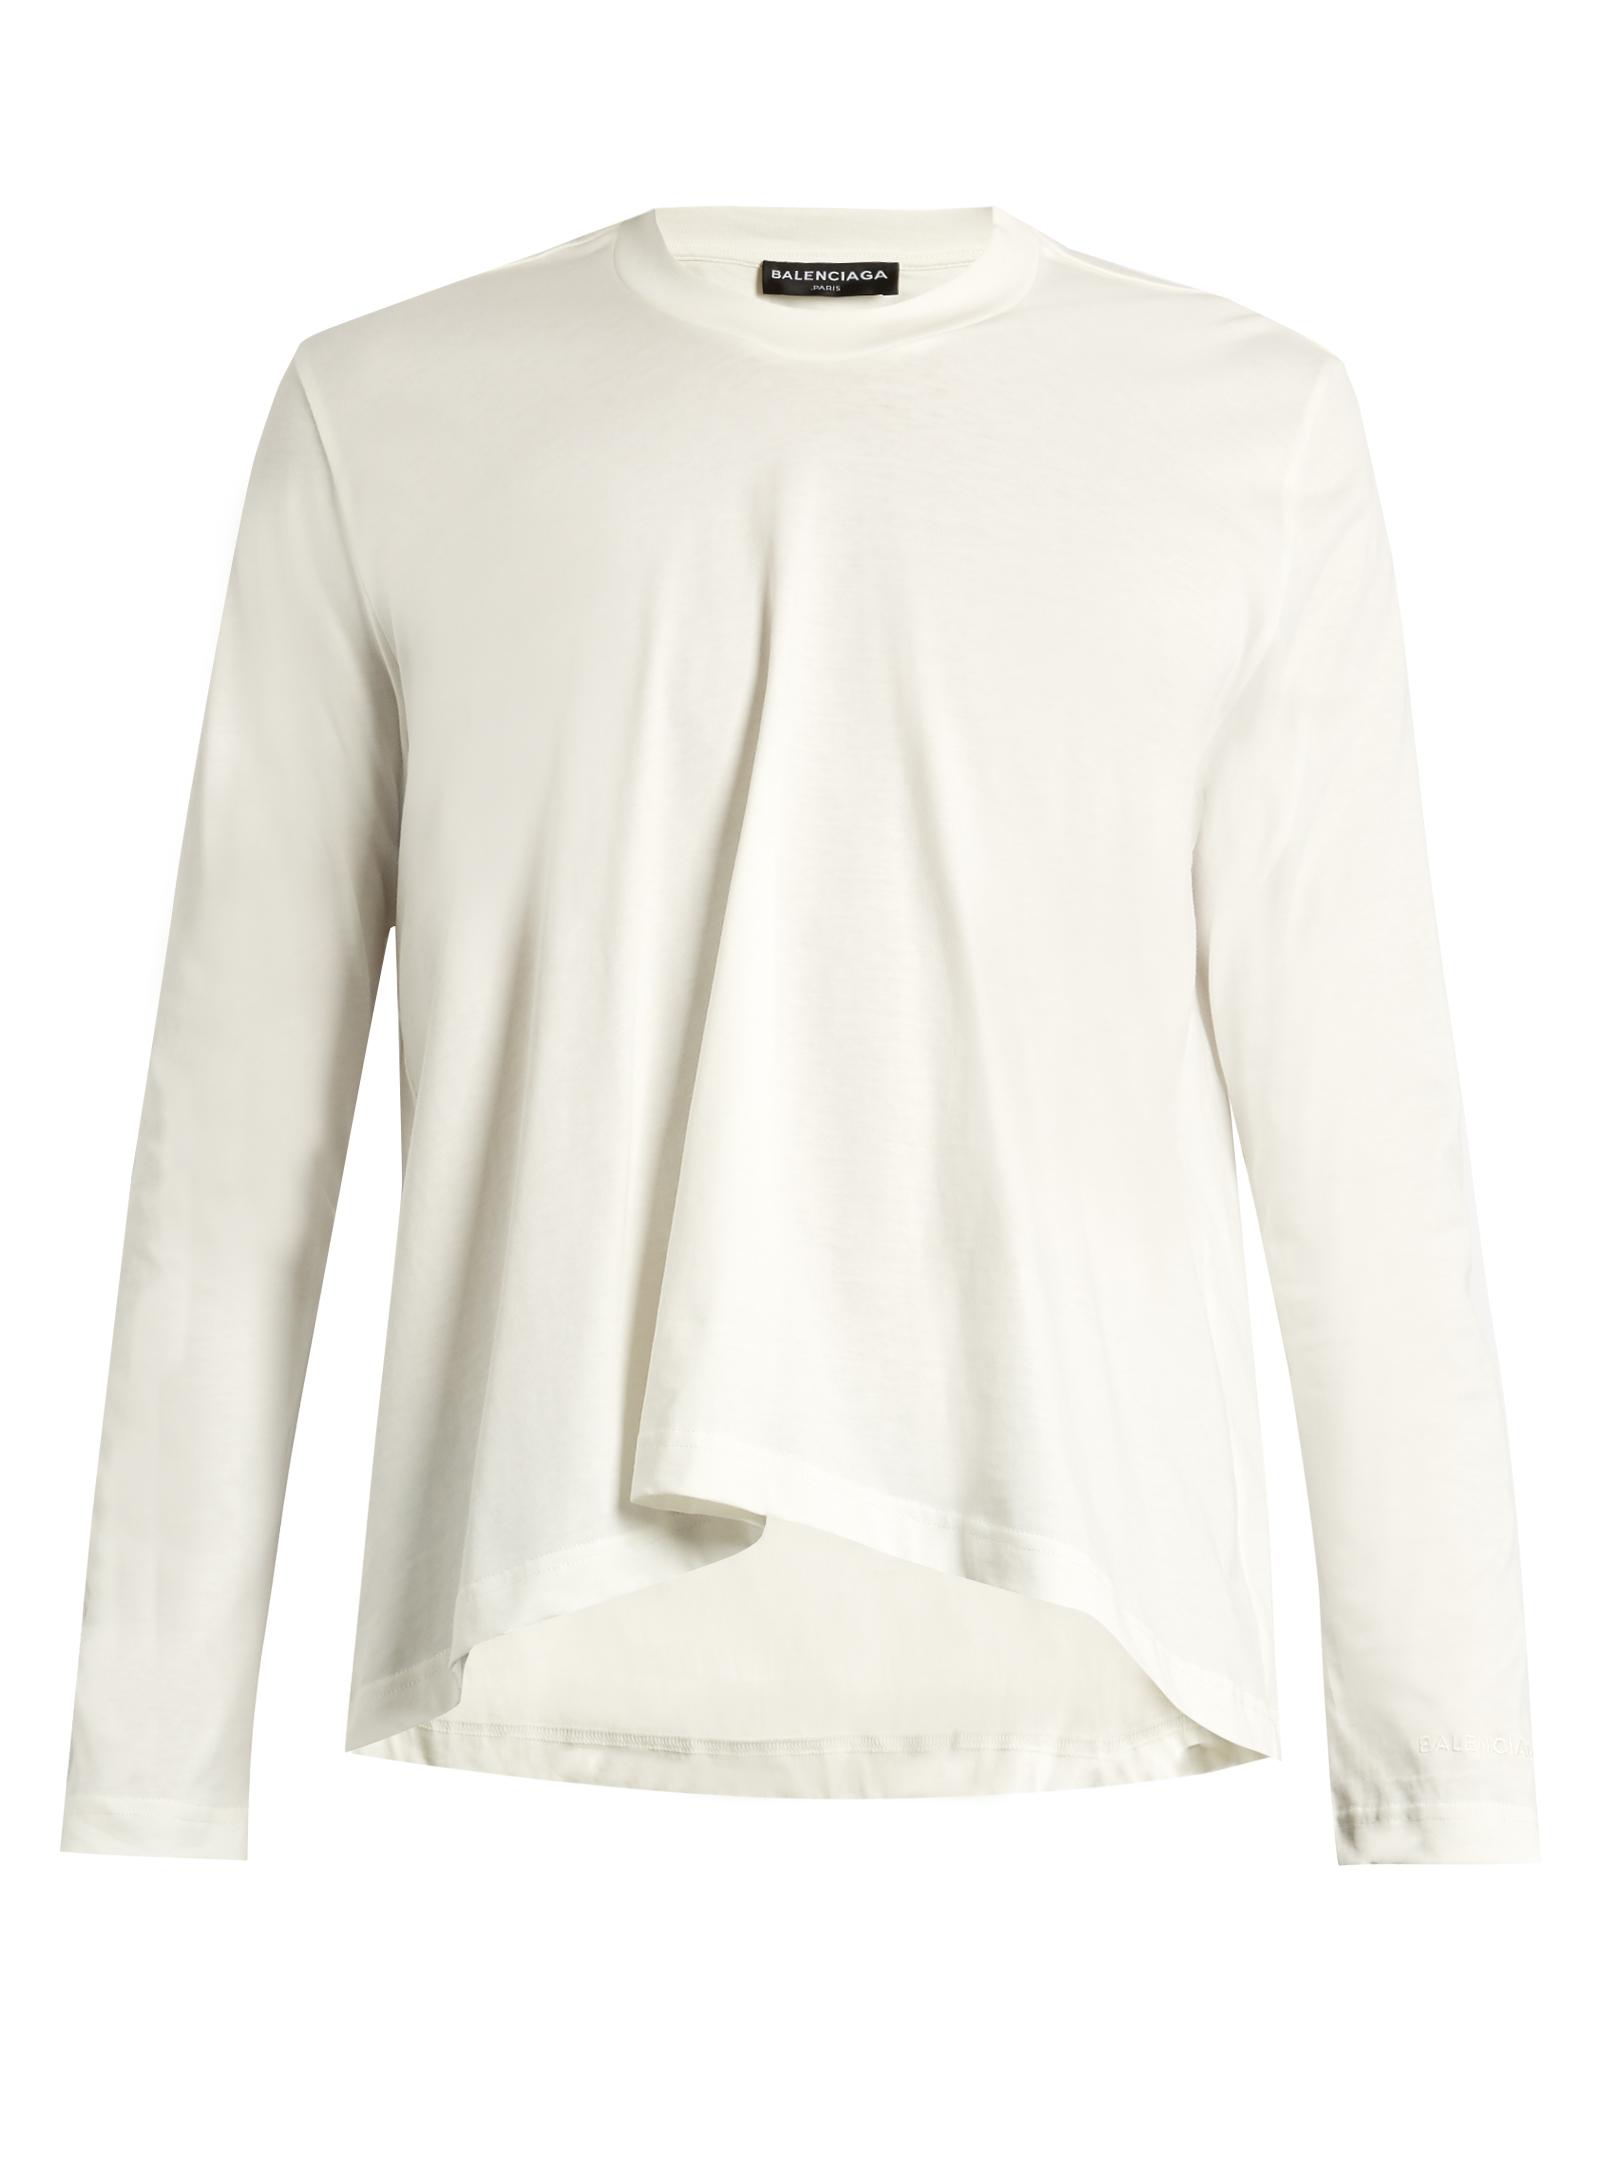 Balenciaga Long-sleeved Fluted Cotton T-shirt in White for Men - Lyst